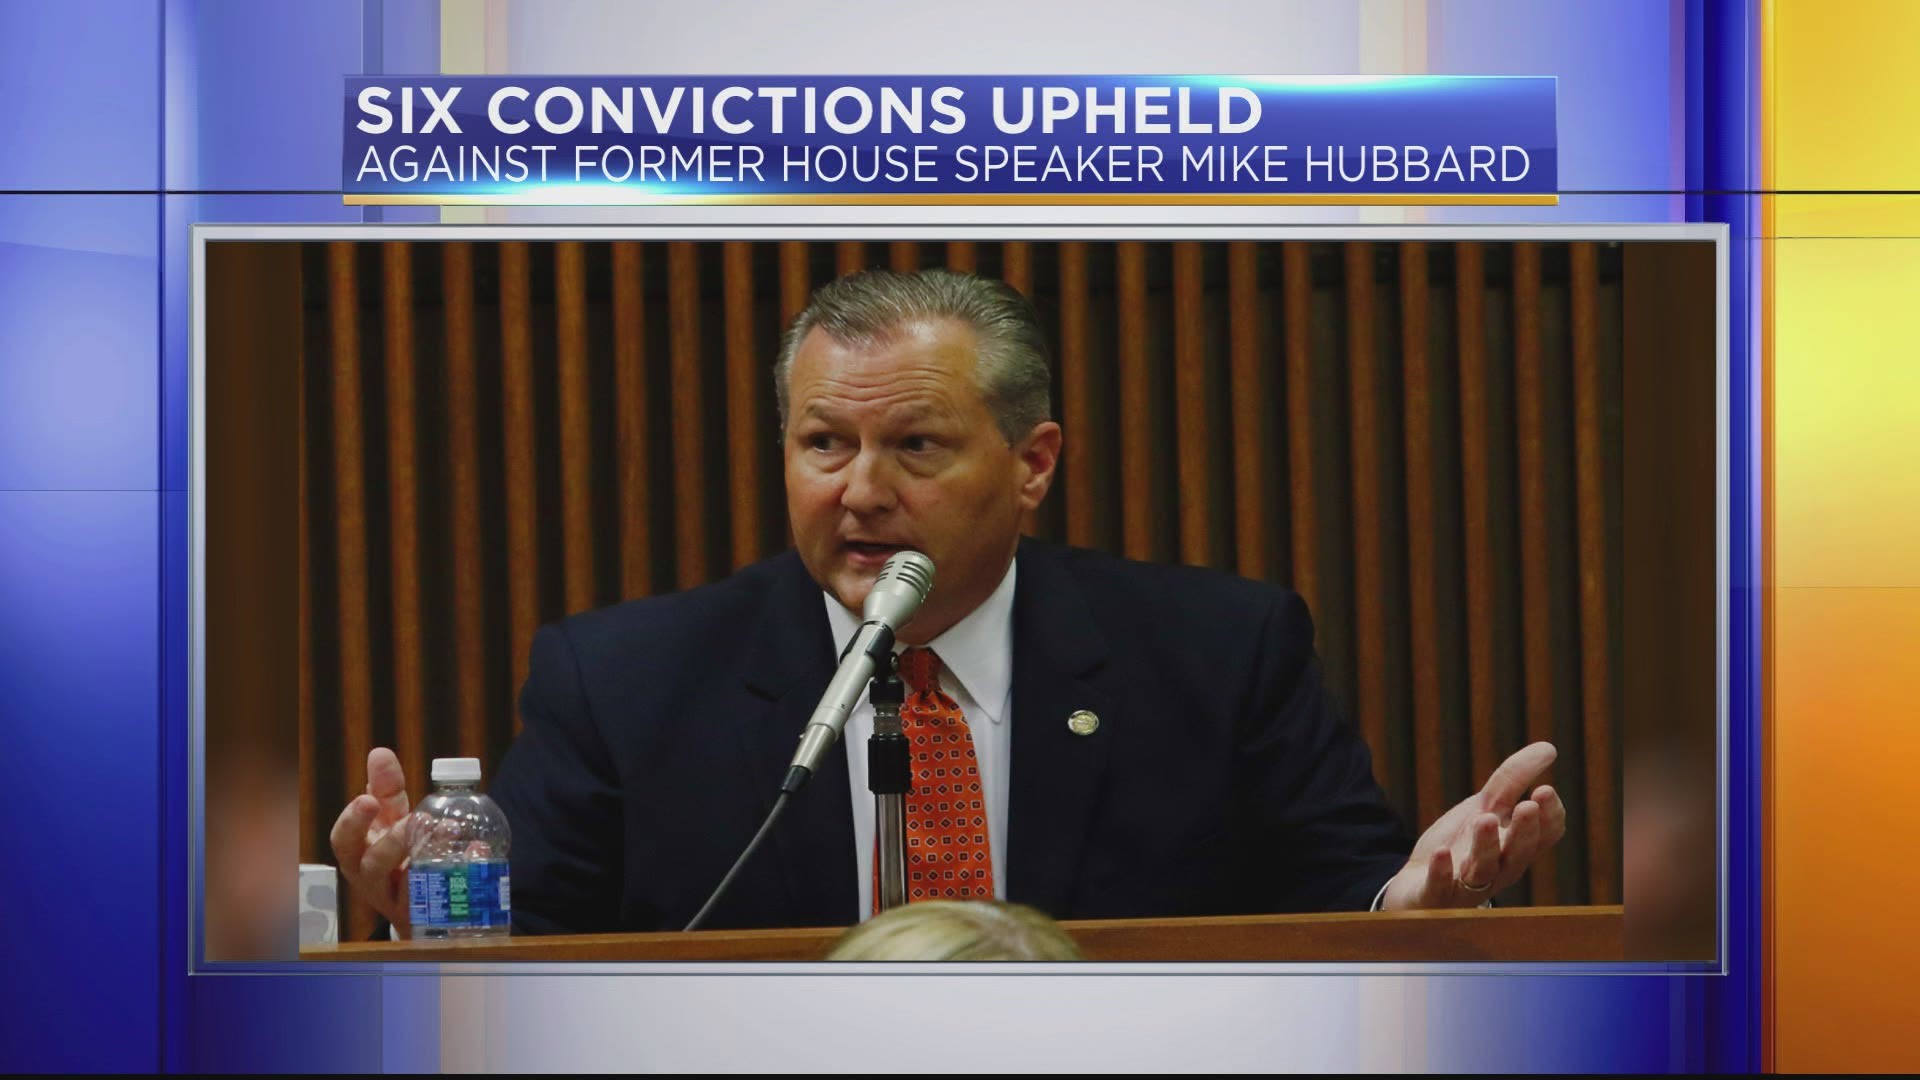 It took nearly two years, but the Alabama Supreme Court has ruled on former Alabama House Speaker Mike Hubbard’s appeal of his felony ethics convictions.